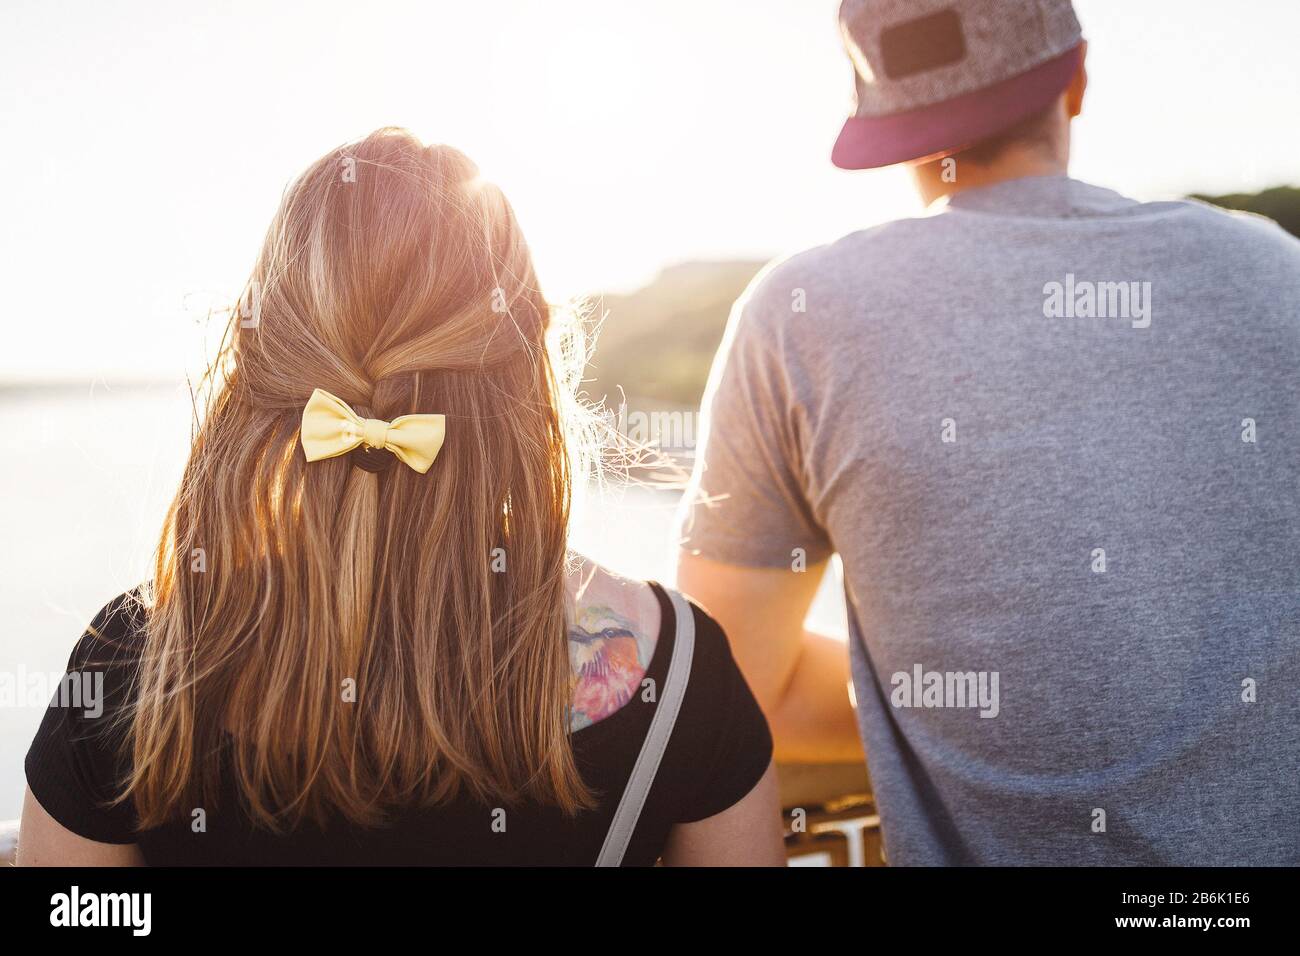 Rear view of romantic couple outdoors Stock Photo